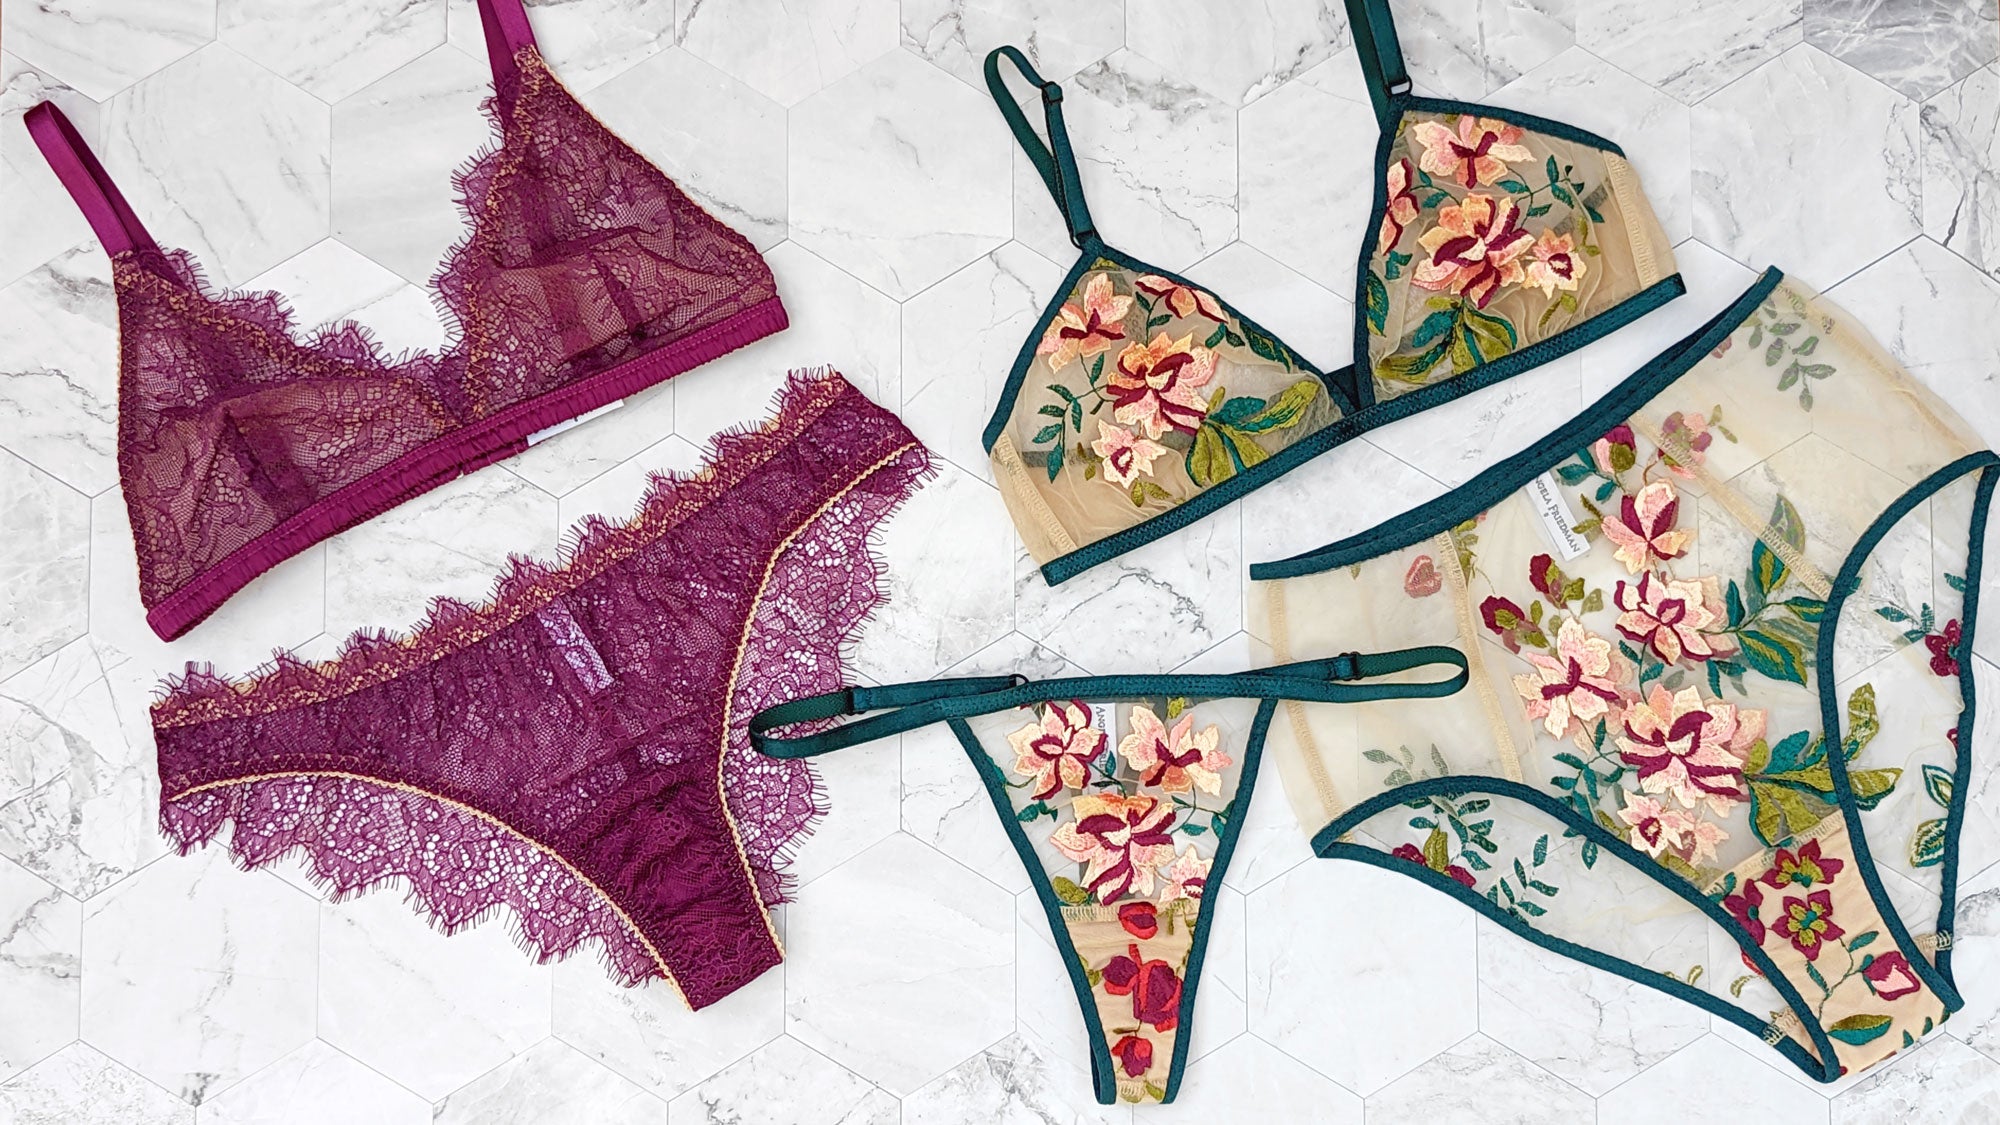 Designer expensive lingerie sets in magenta pink and floral embroidery